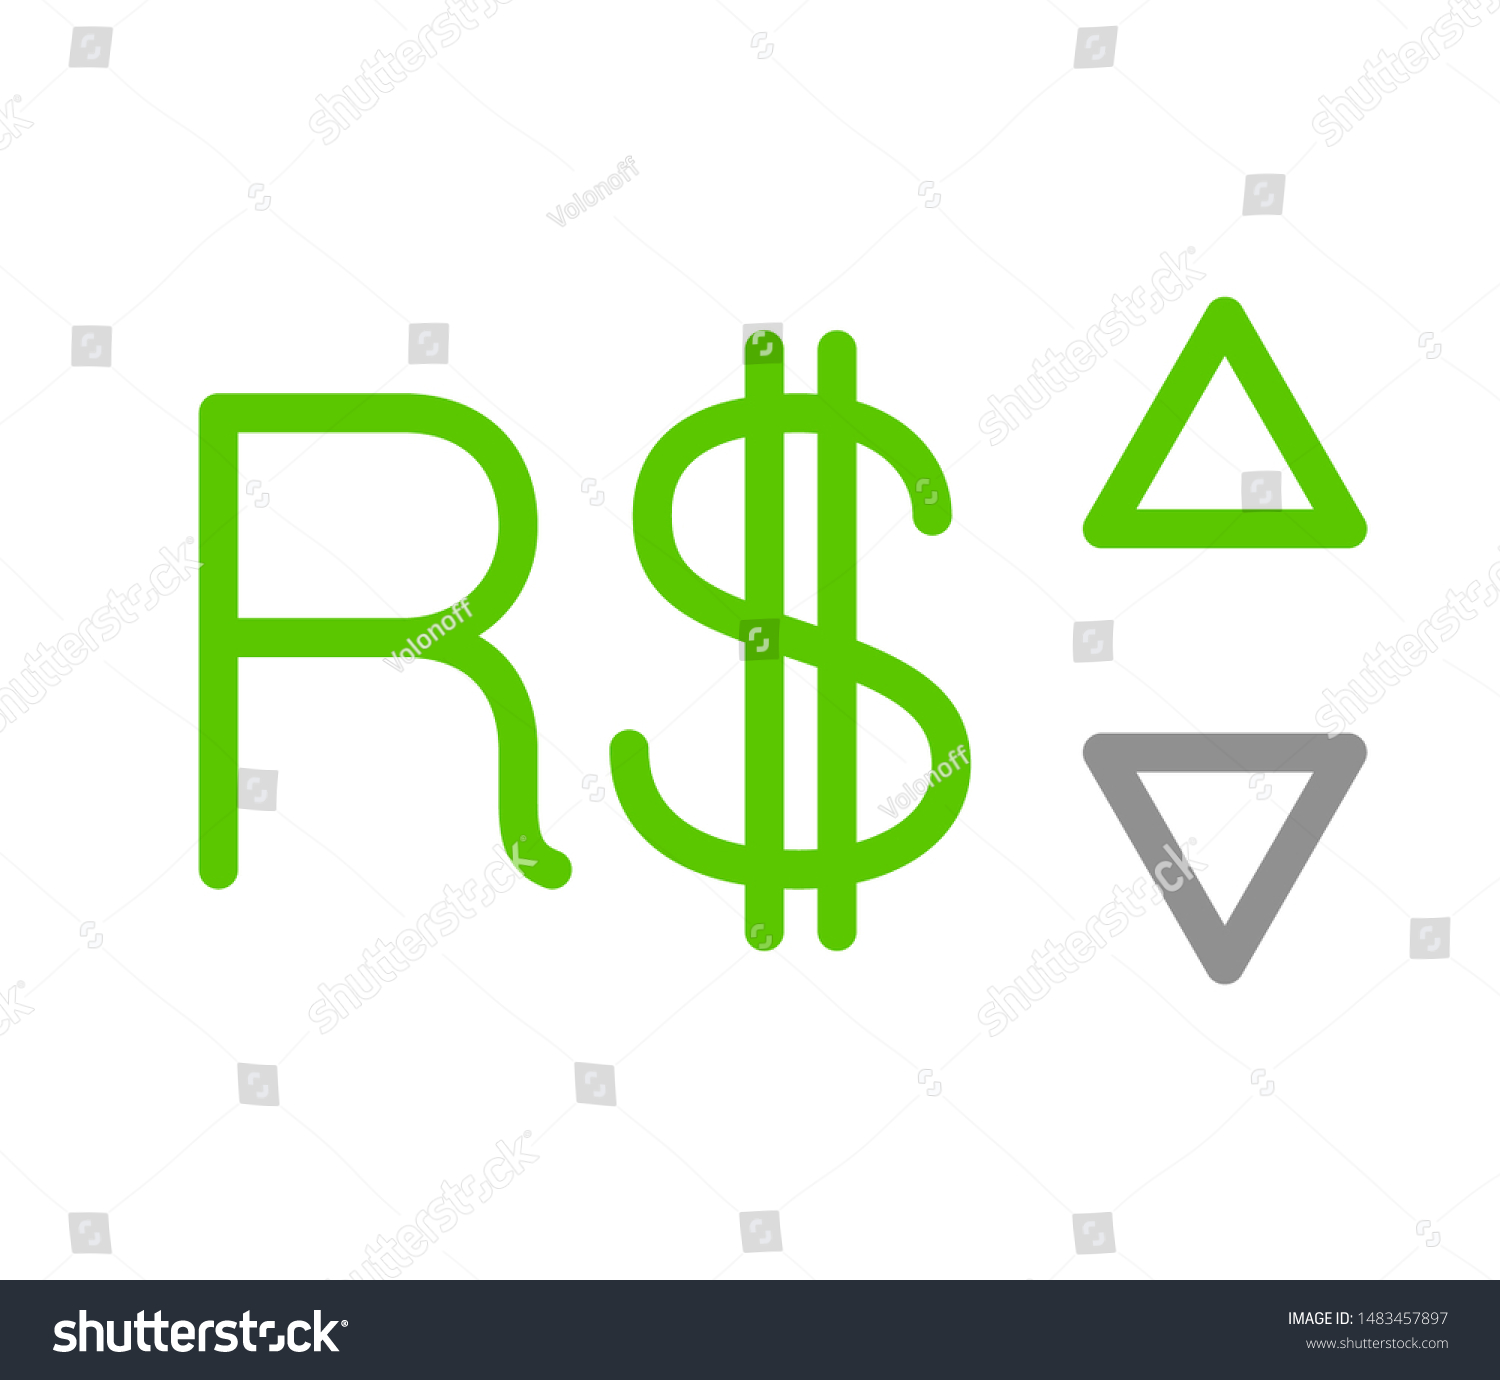 SVG of RS, BRL, 986, Real, Brazil Banking Currency icon typography logo banner set isolated on background. Abstract concept graphic element. Collection of currency symbols ISO 4217 signs used in country svg